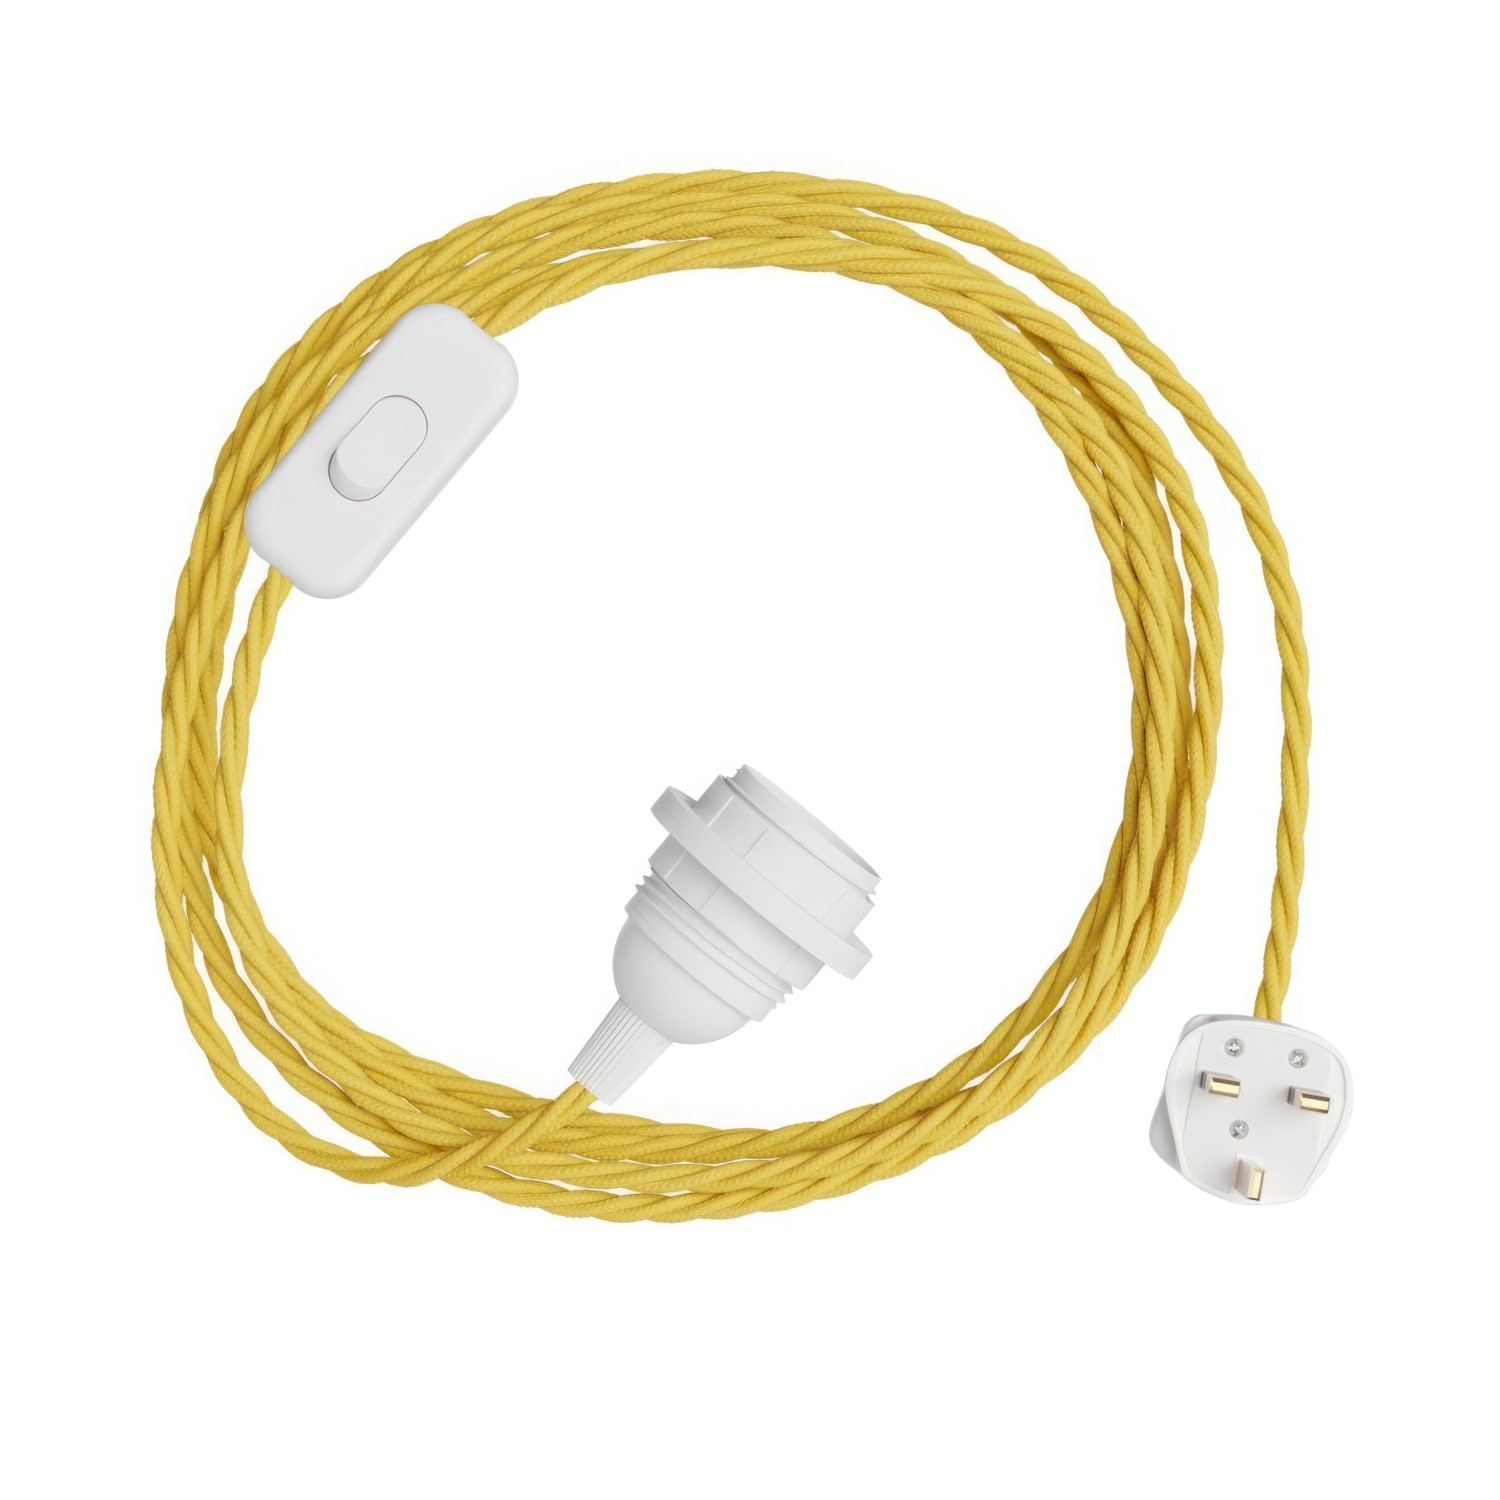 SnakeBis Twisted for lampshade - Wiring with lamp holder and twisted textile cable and UK plug